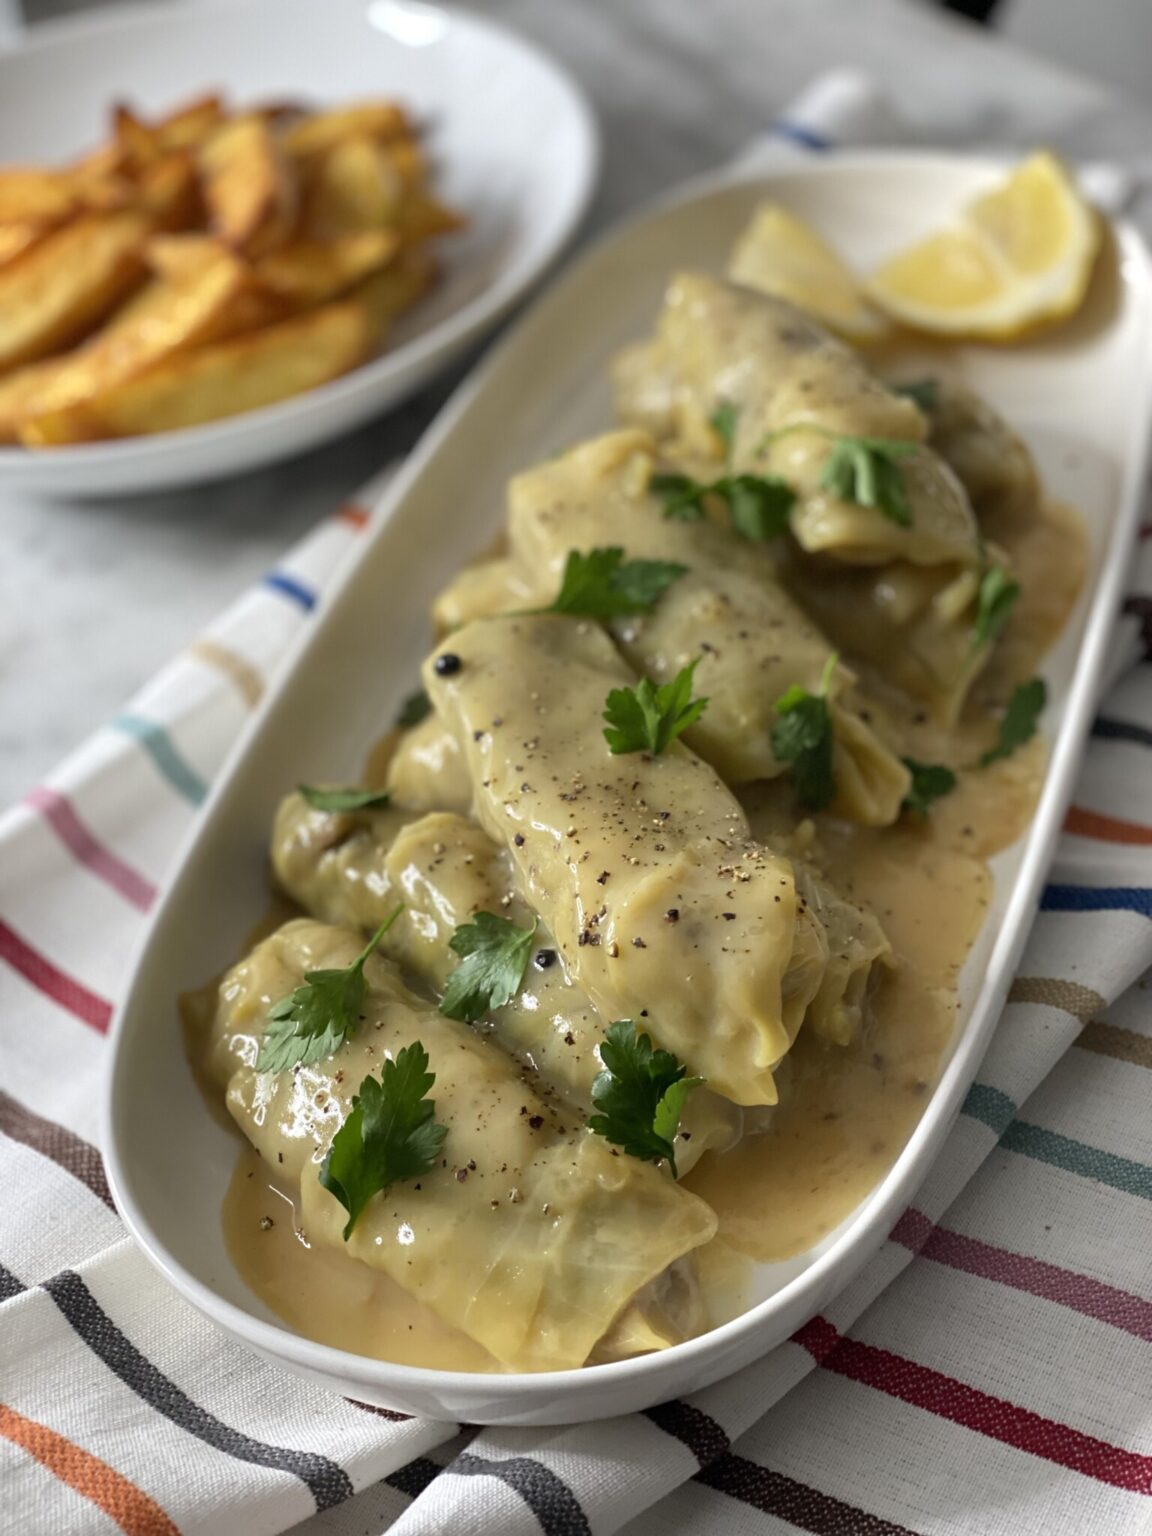 Cabbage Rolls - Greek Style with Lemon Egg Sauce